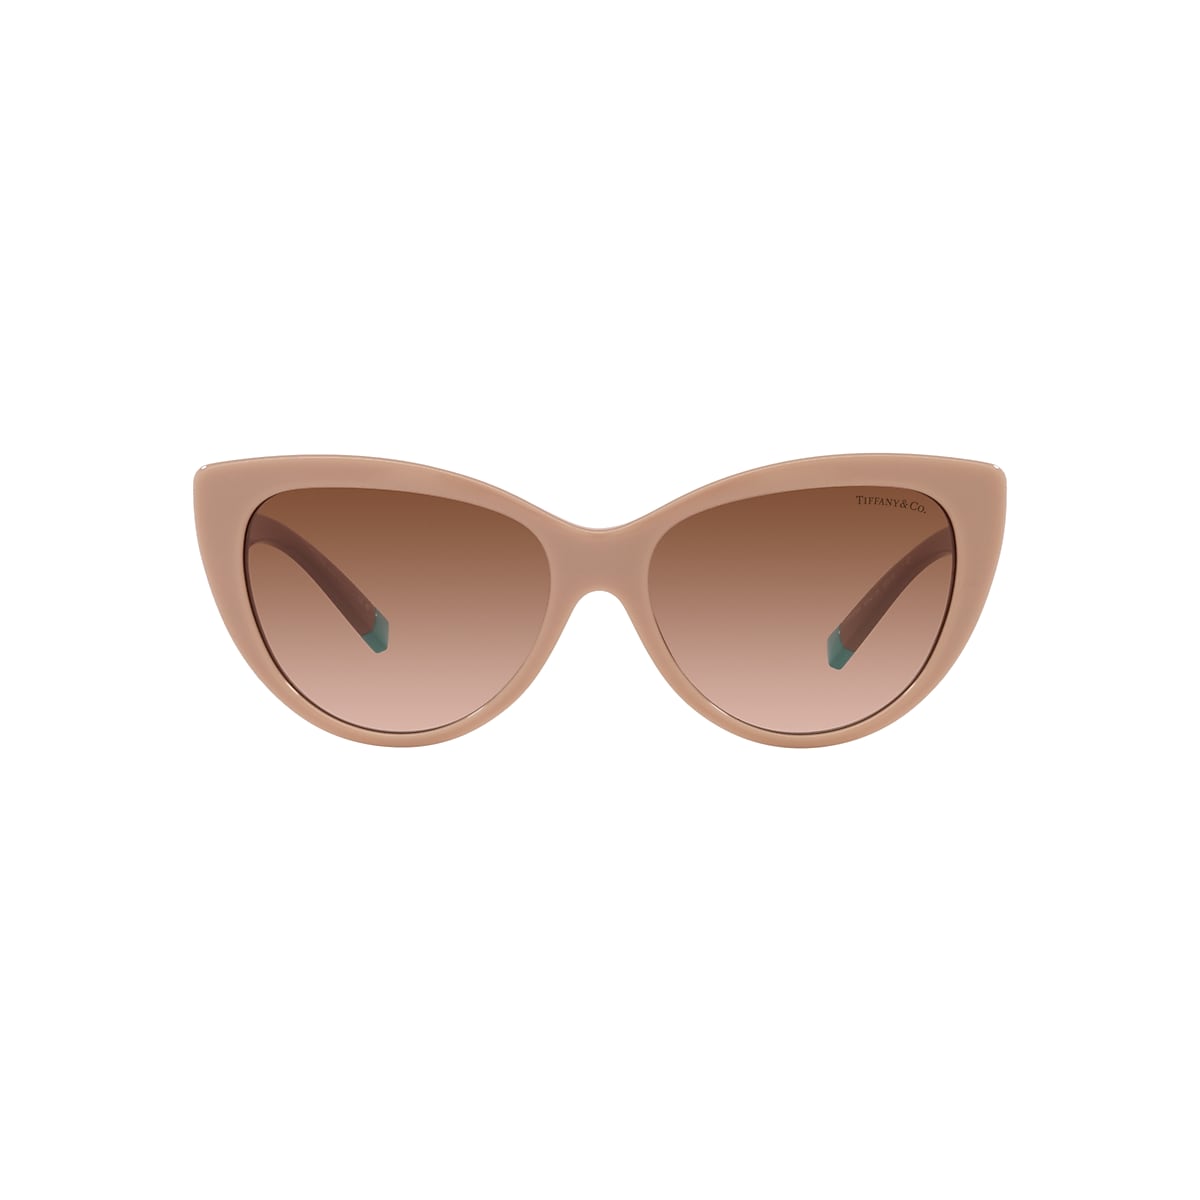 TIFFANY & CO. TF4196 Solid Nude - Woman Luxury Sunglasses, Brown Gradient  Lens